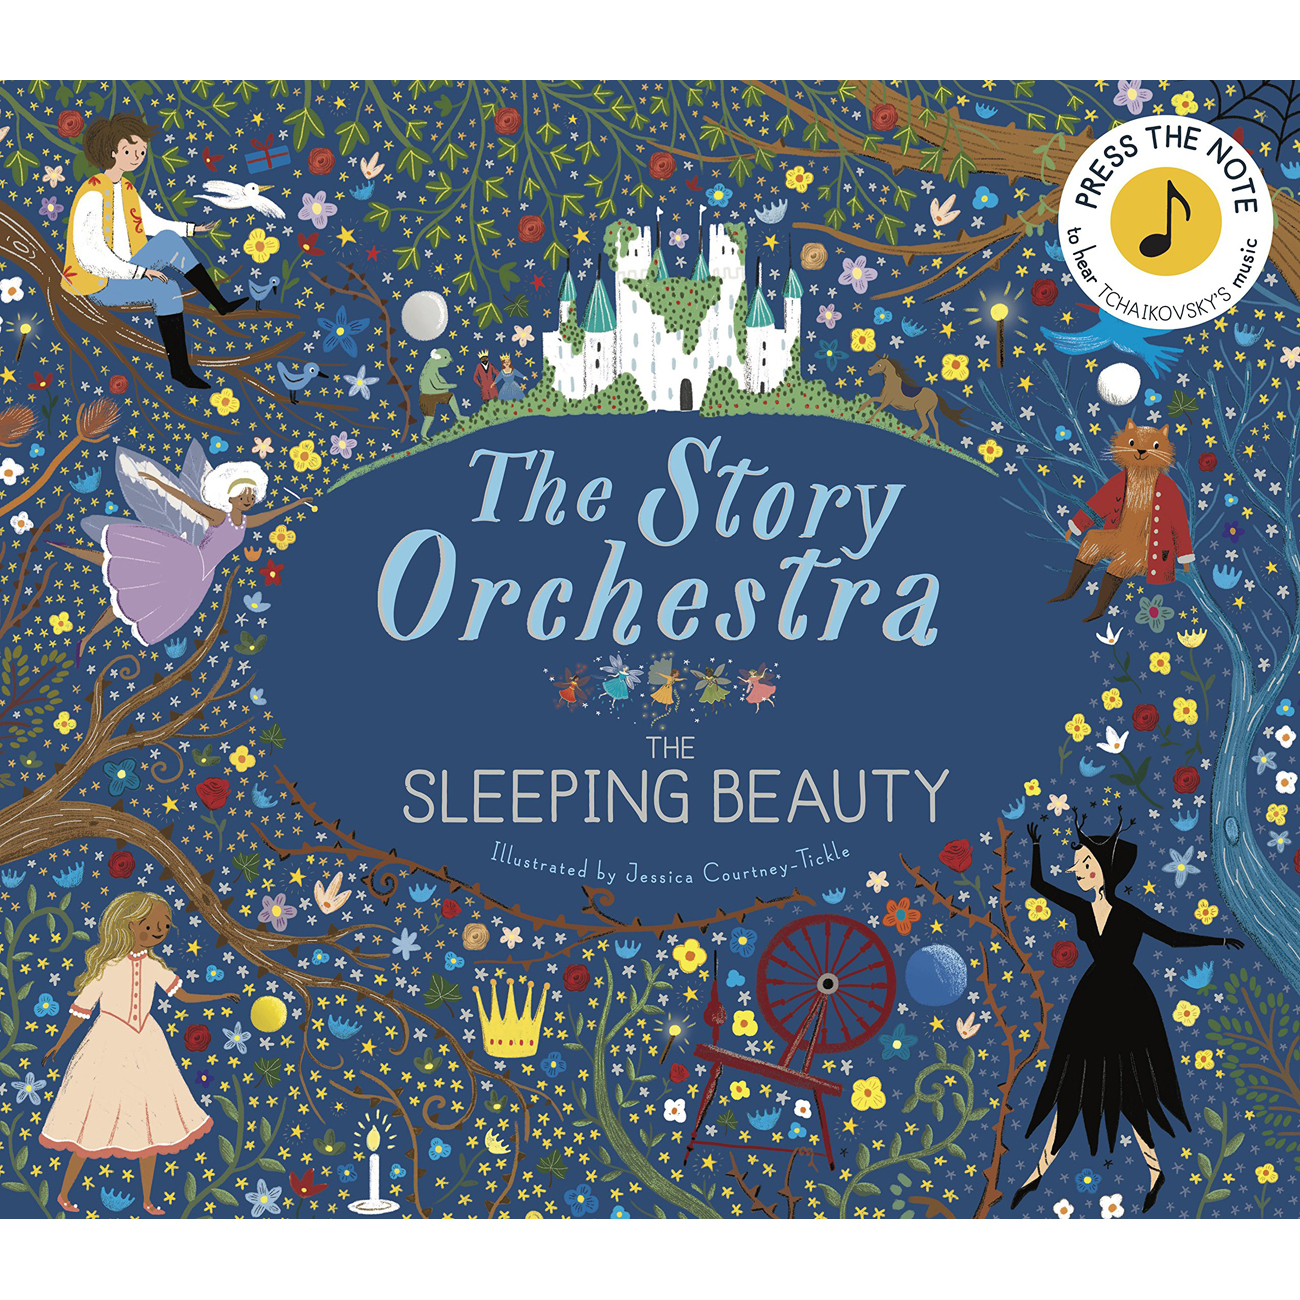 Shop　(Hardcover)　Sleeping　Met　KIDS　Beauty　Story　The　Orchestra:　The　Opera